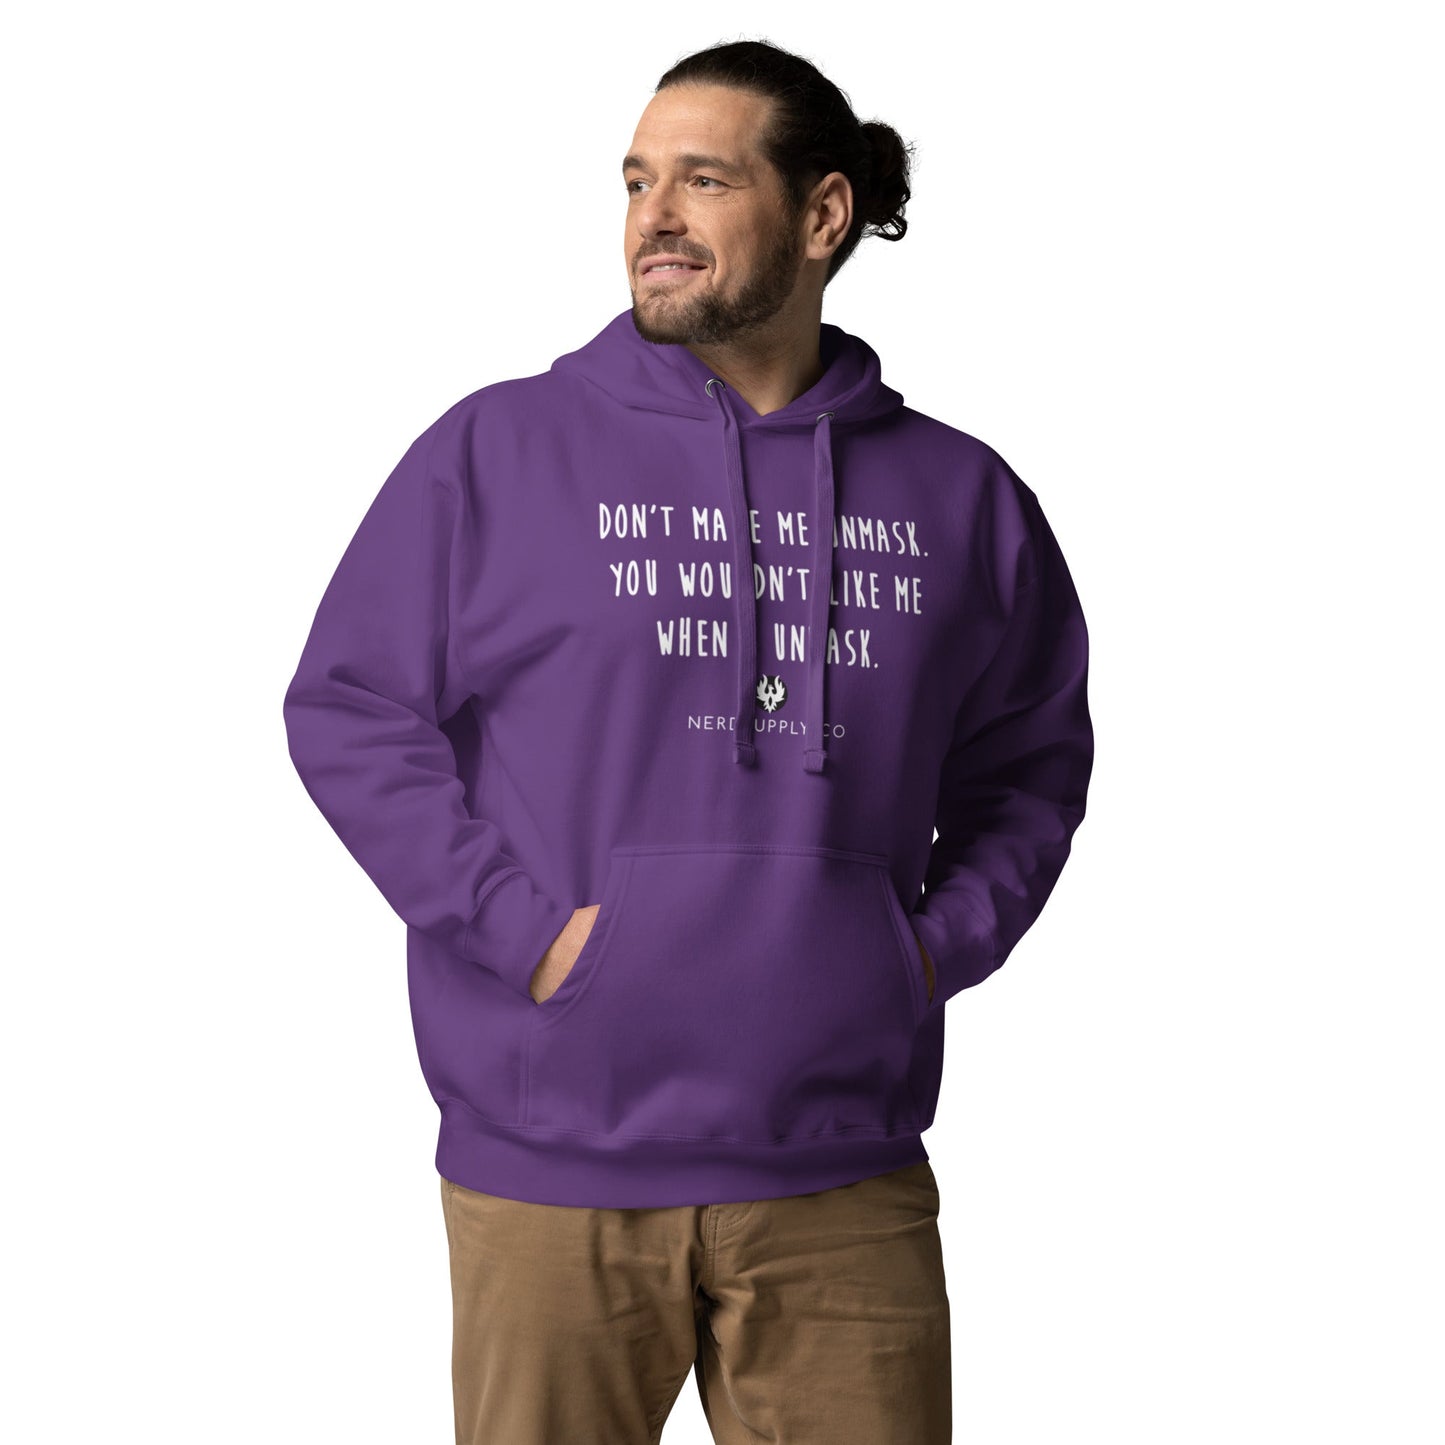 "Don't make me unmask" - Hoodie - The Nerd Supply Company